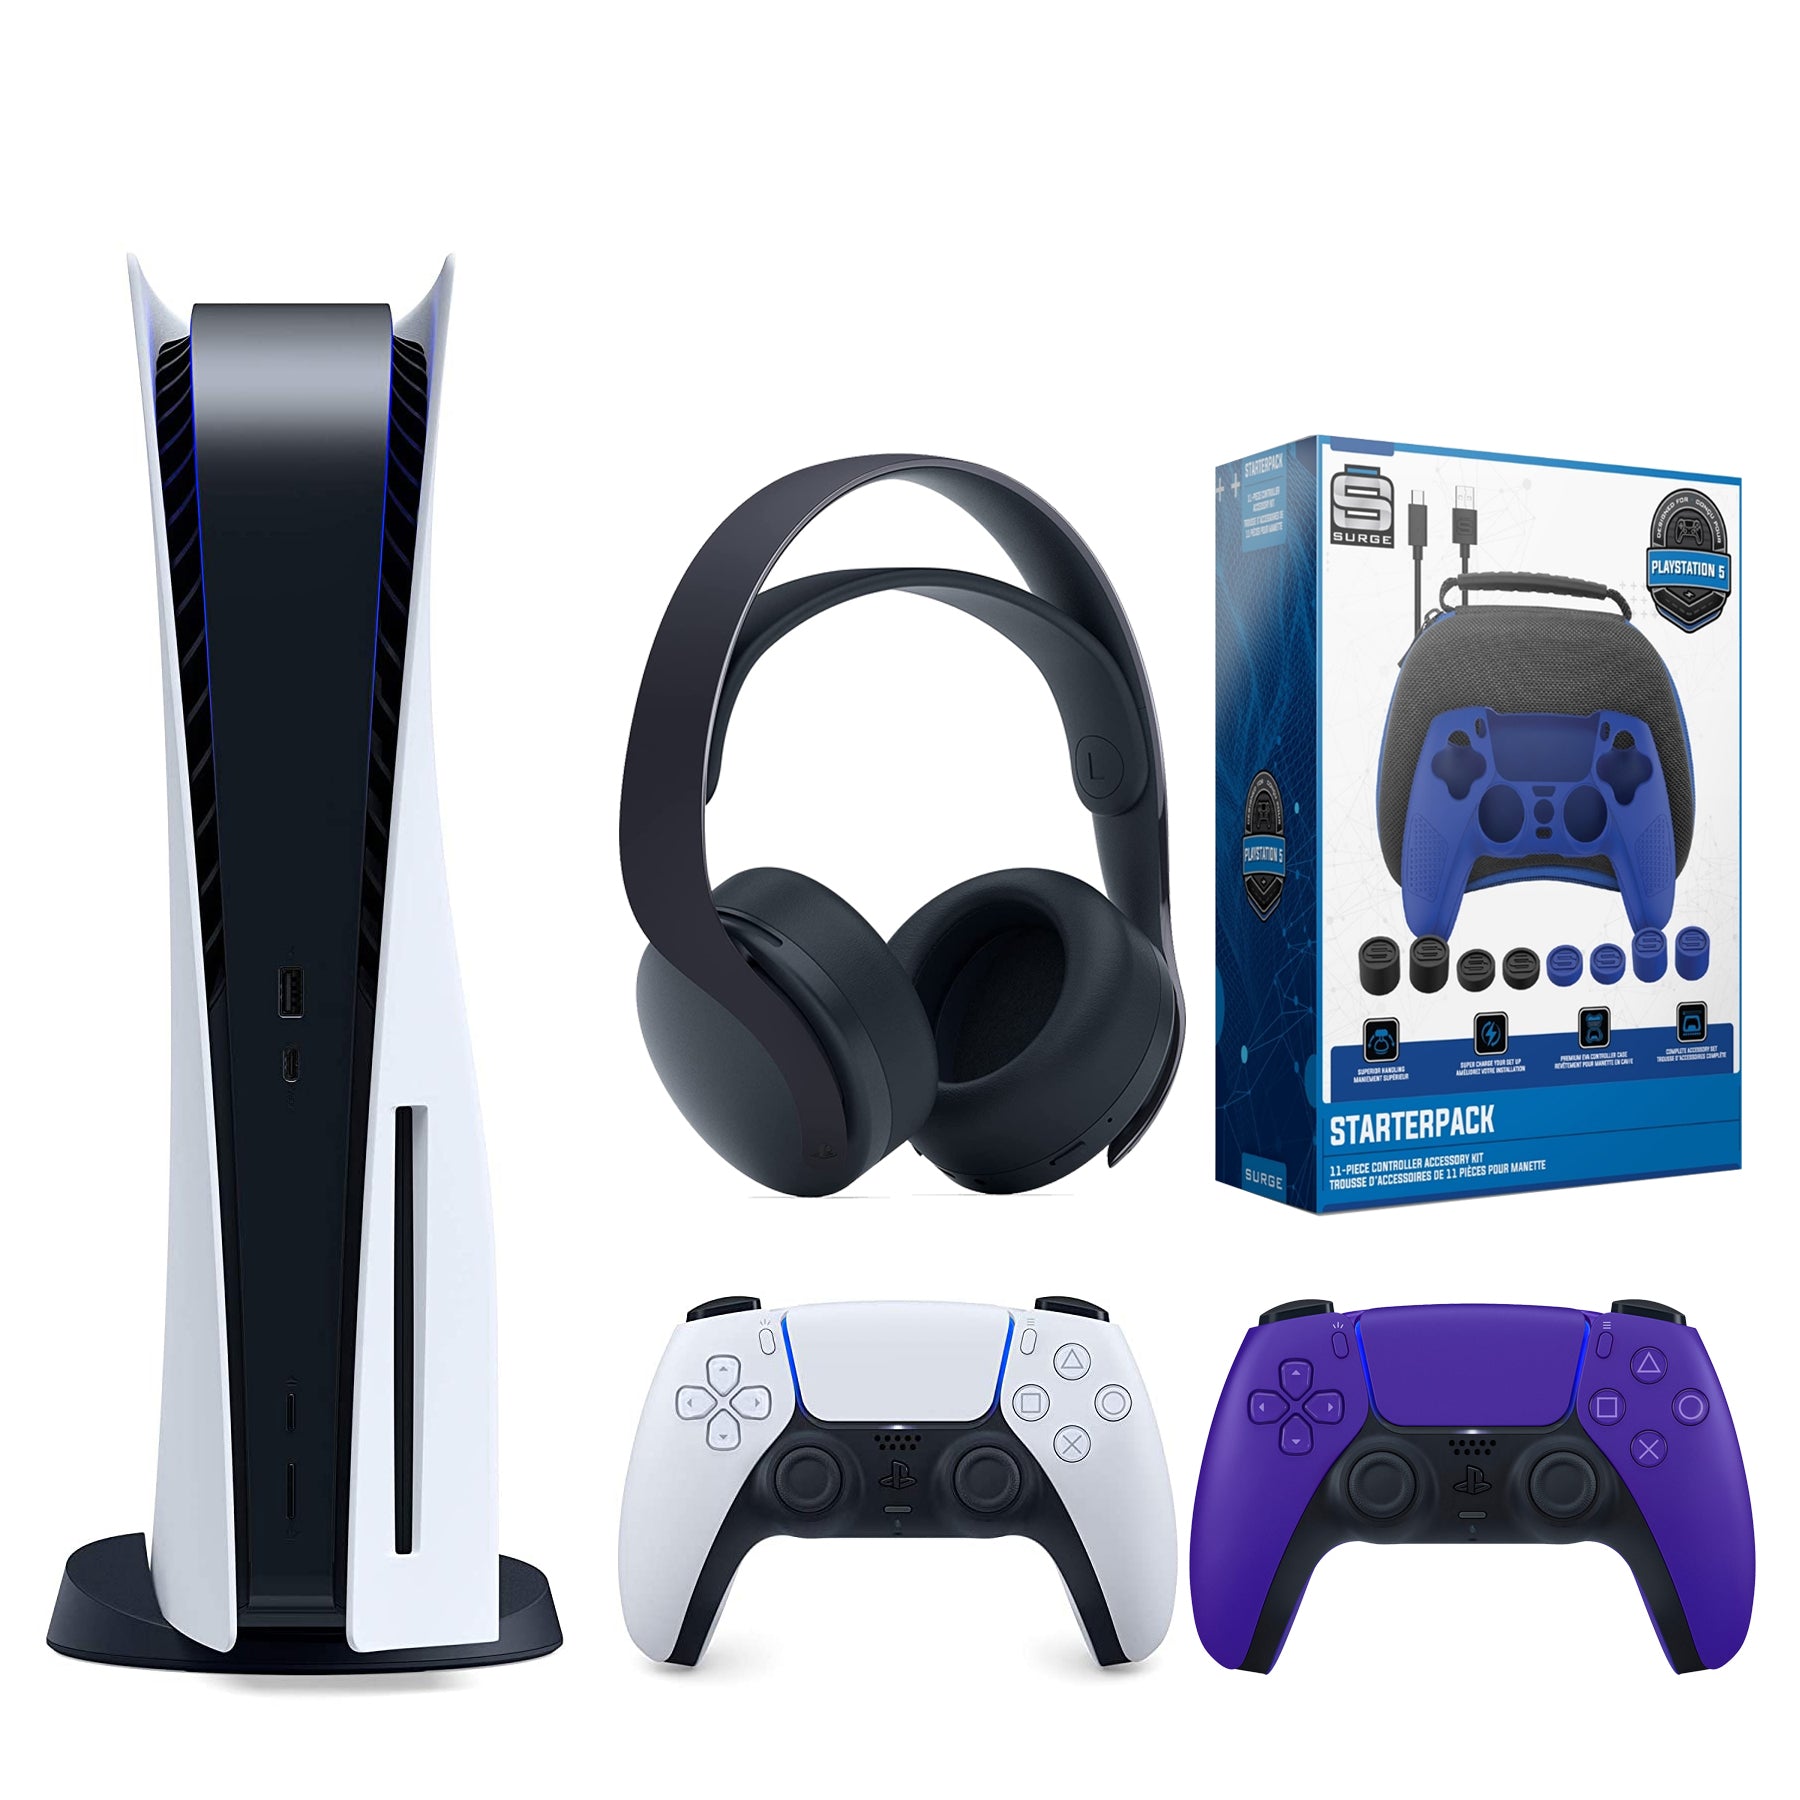 Sony Playstation 5 Disc Version (Sony PS5 Disc) with Extra Galactic Purple Controller, Black PULSE 3D Headset and Gamer Starter Pack Bundle - Pro-Distributing